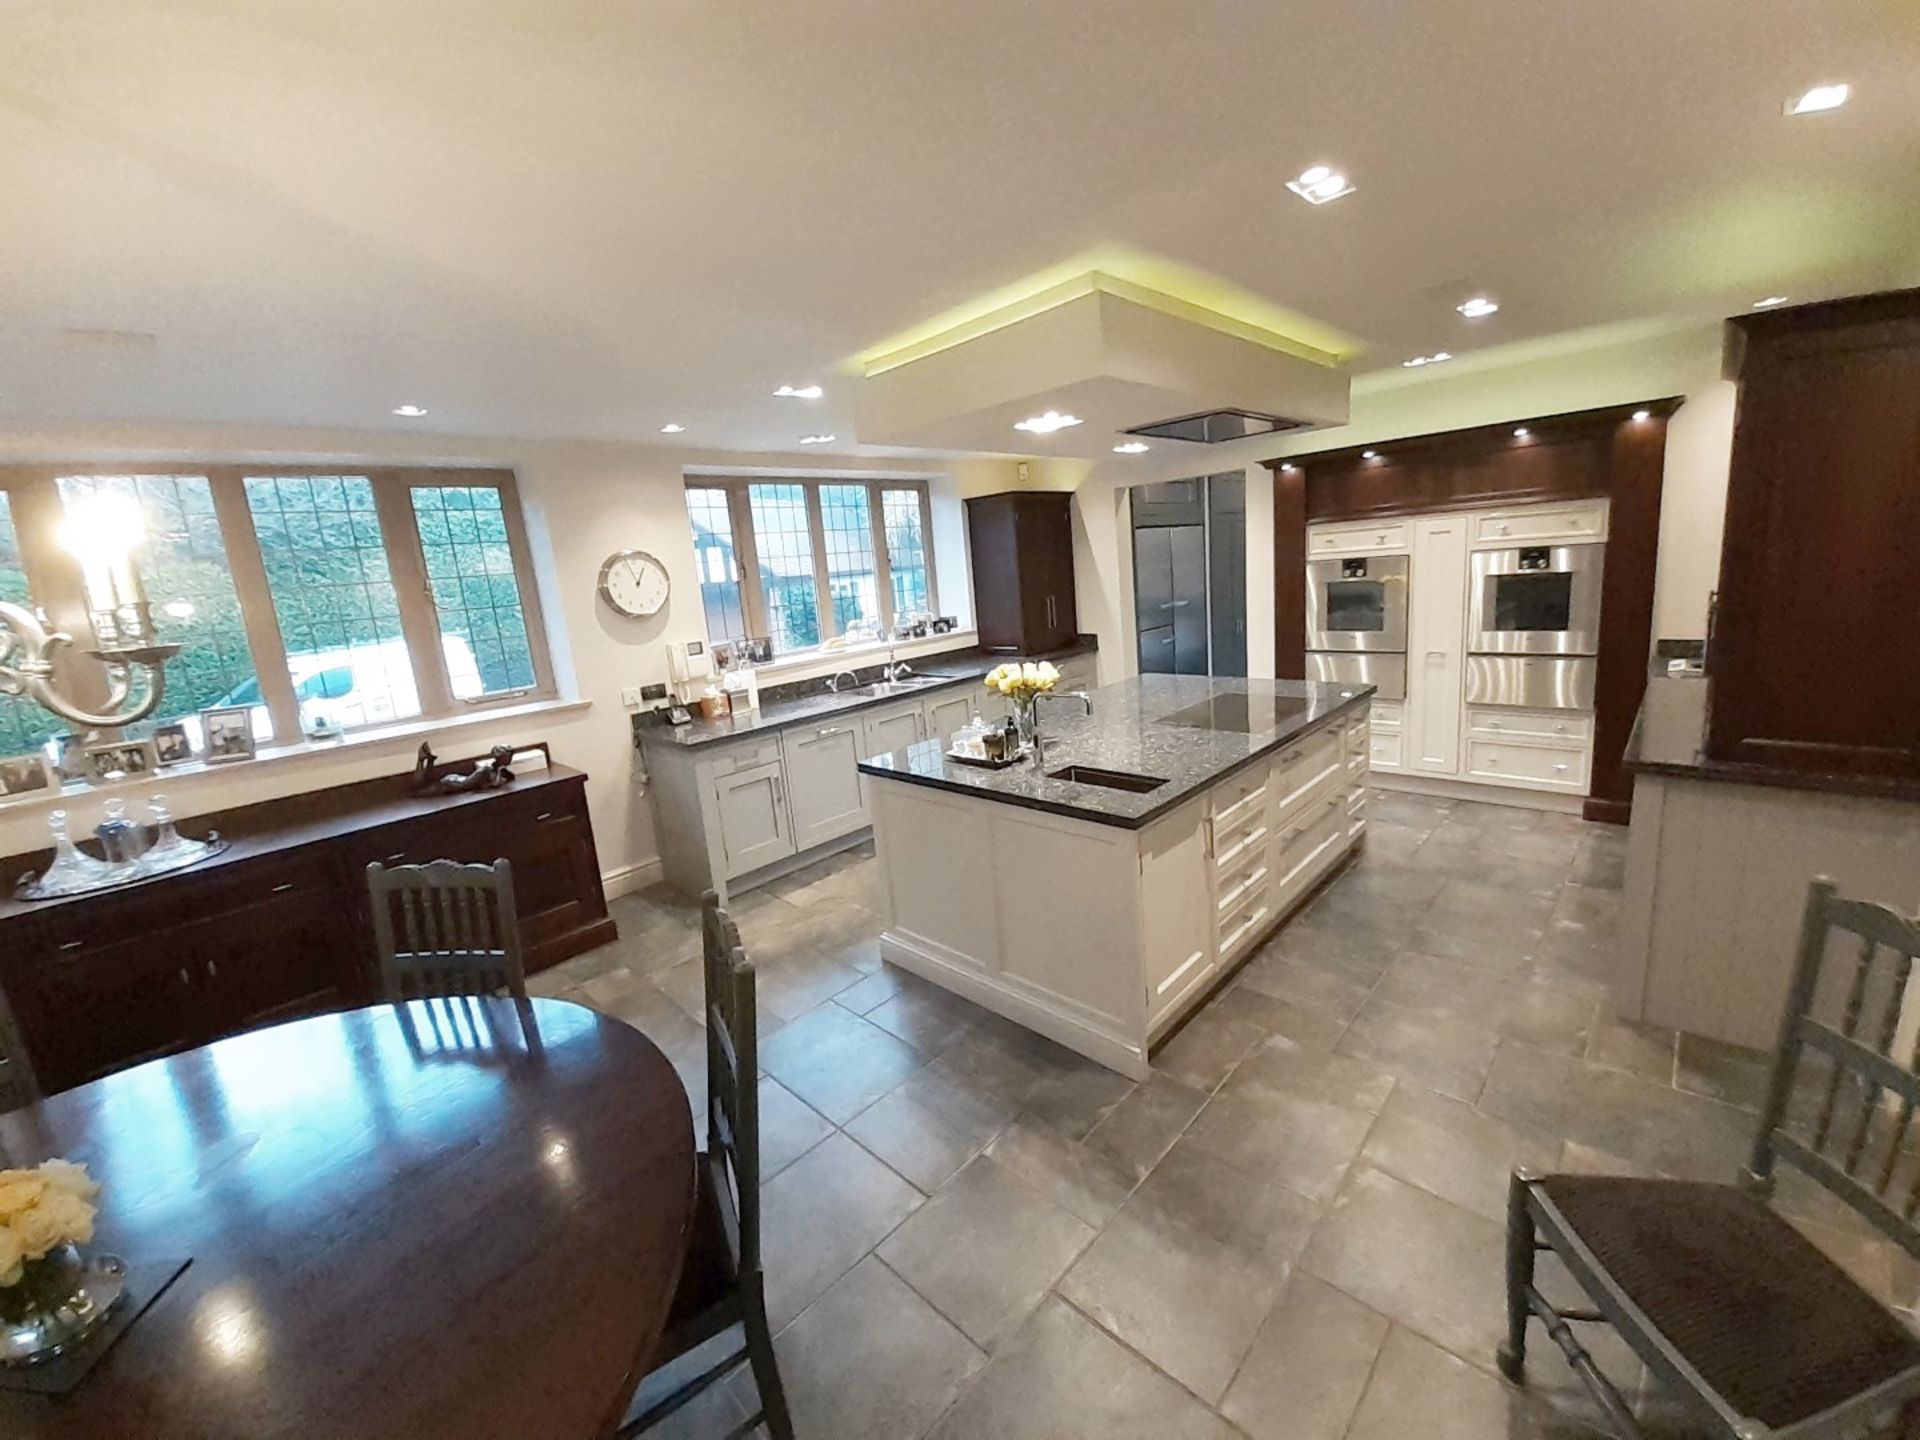 1 x Tom Howley Bespoke Solid Wood Kitchen Beautifully. Appointed With Granite Worktops - Image 2 of 138